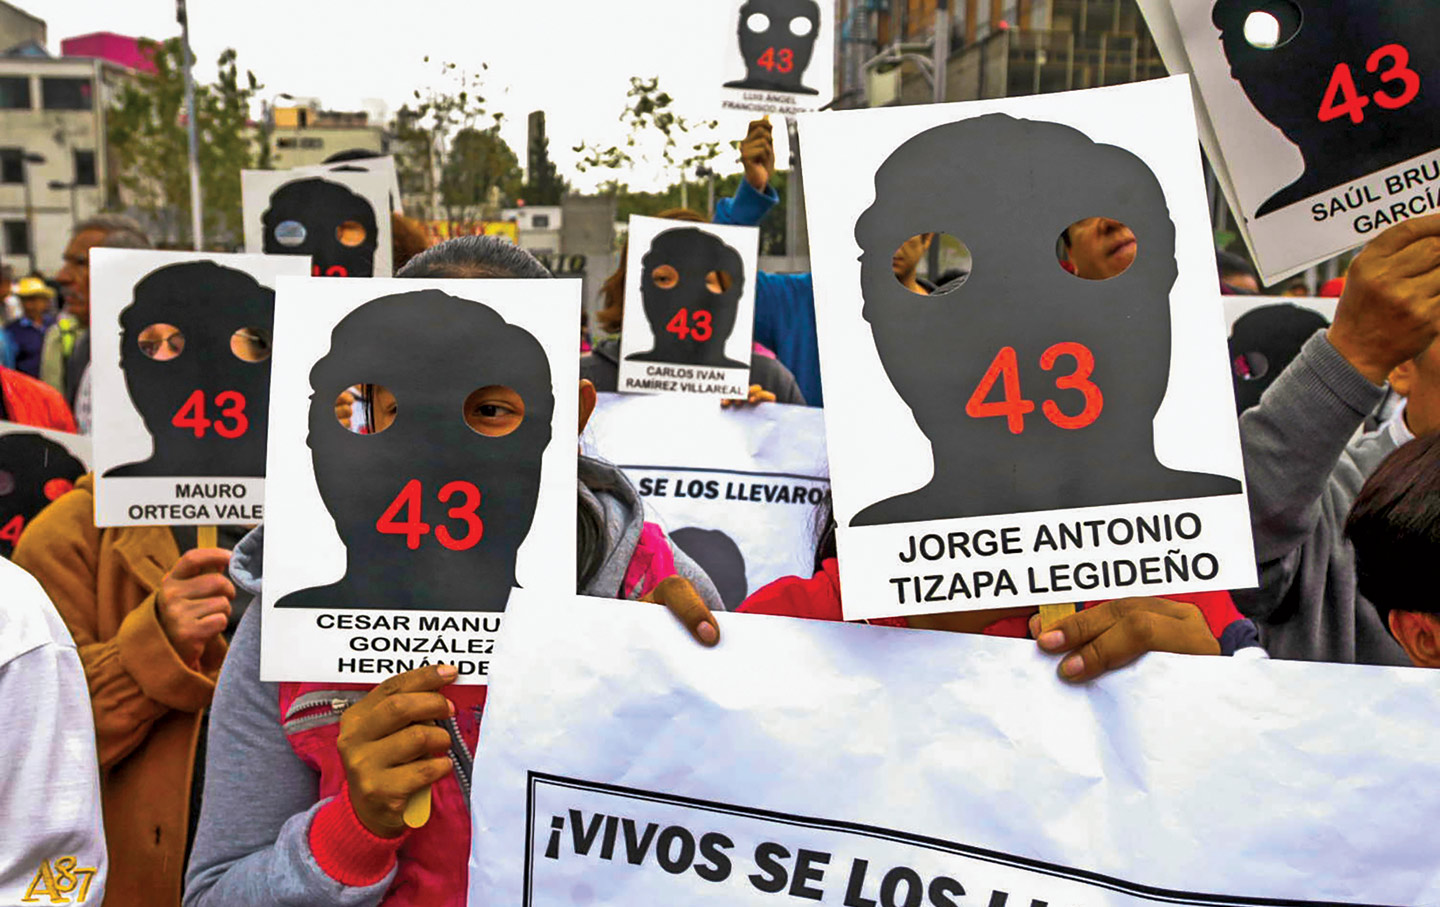 4 Years After the Forced Disappearance of 43 Students, a Father Is Still Looking